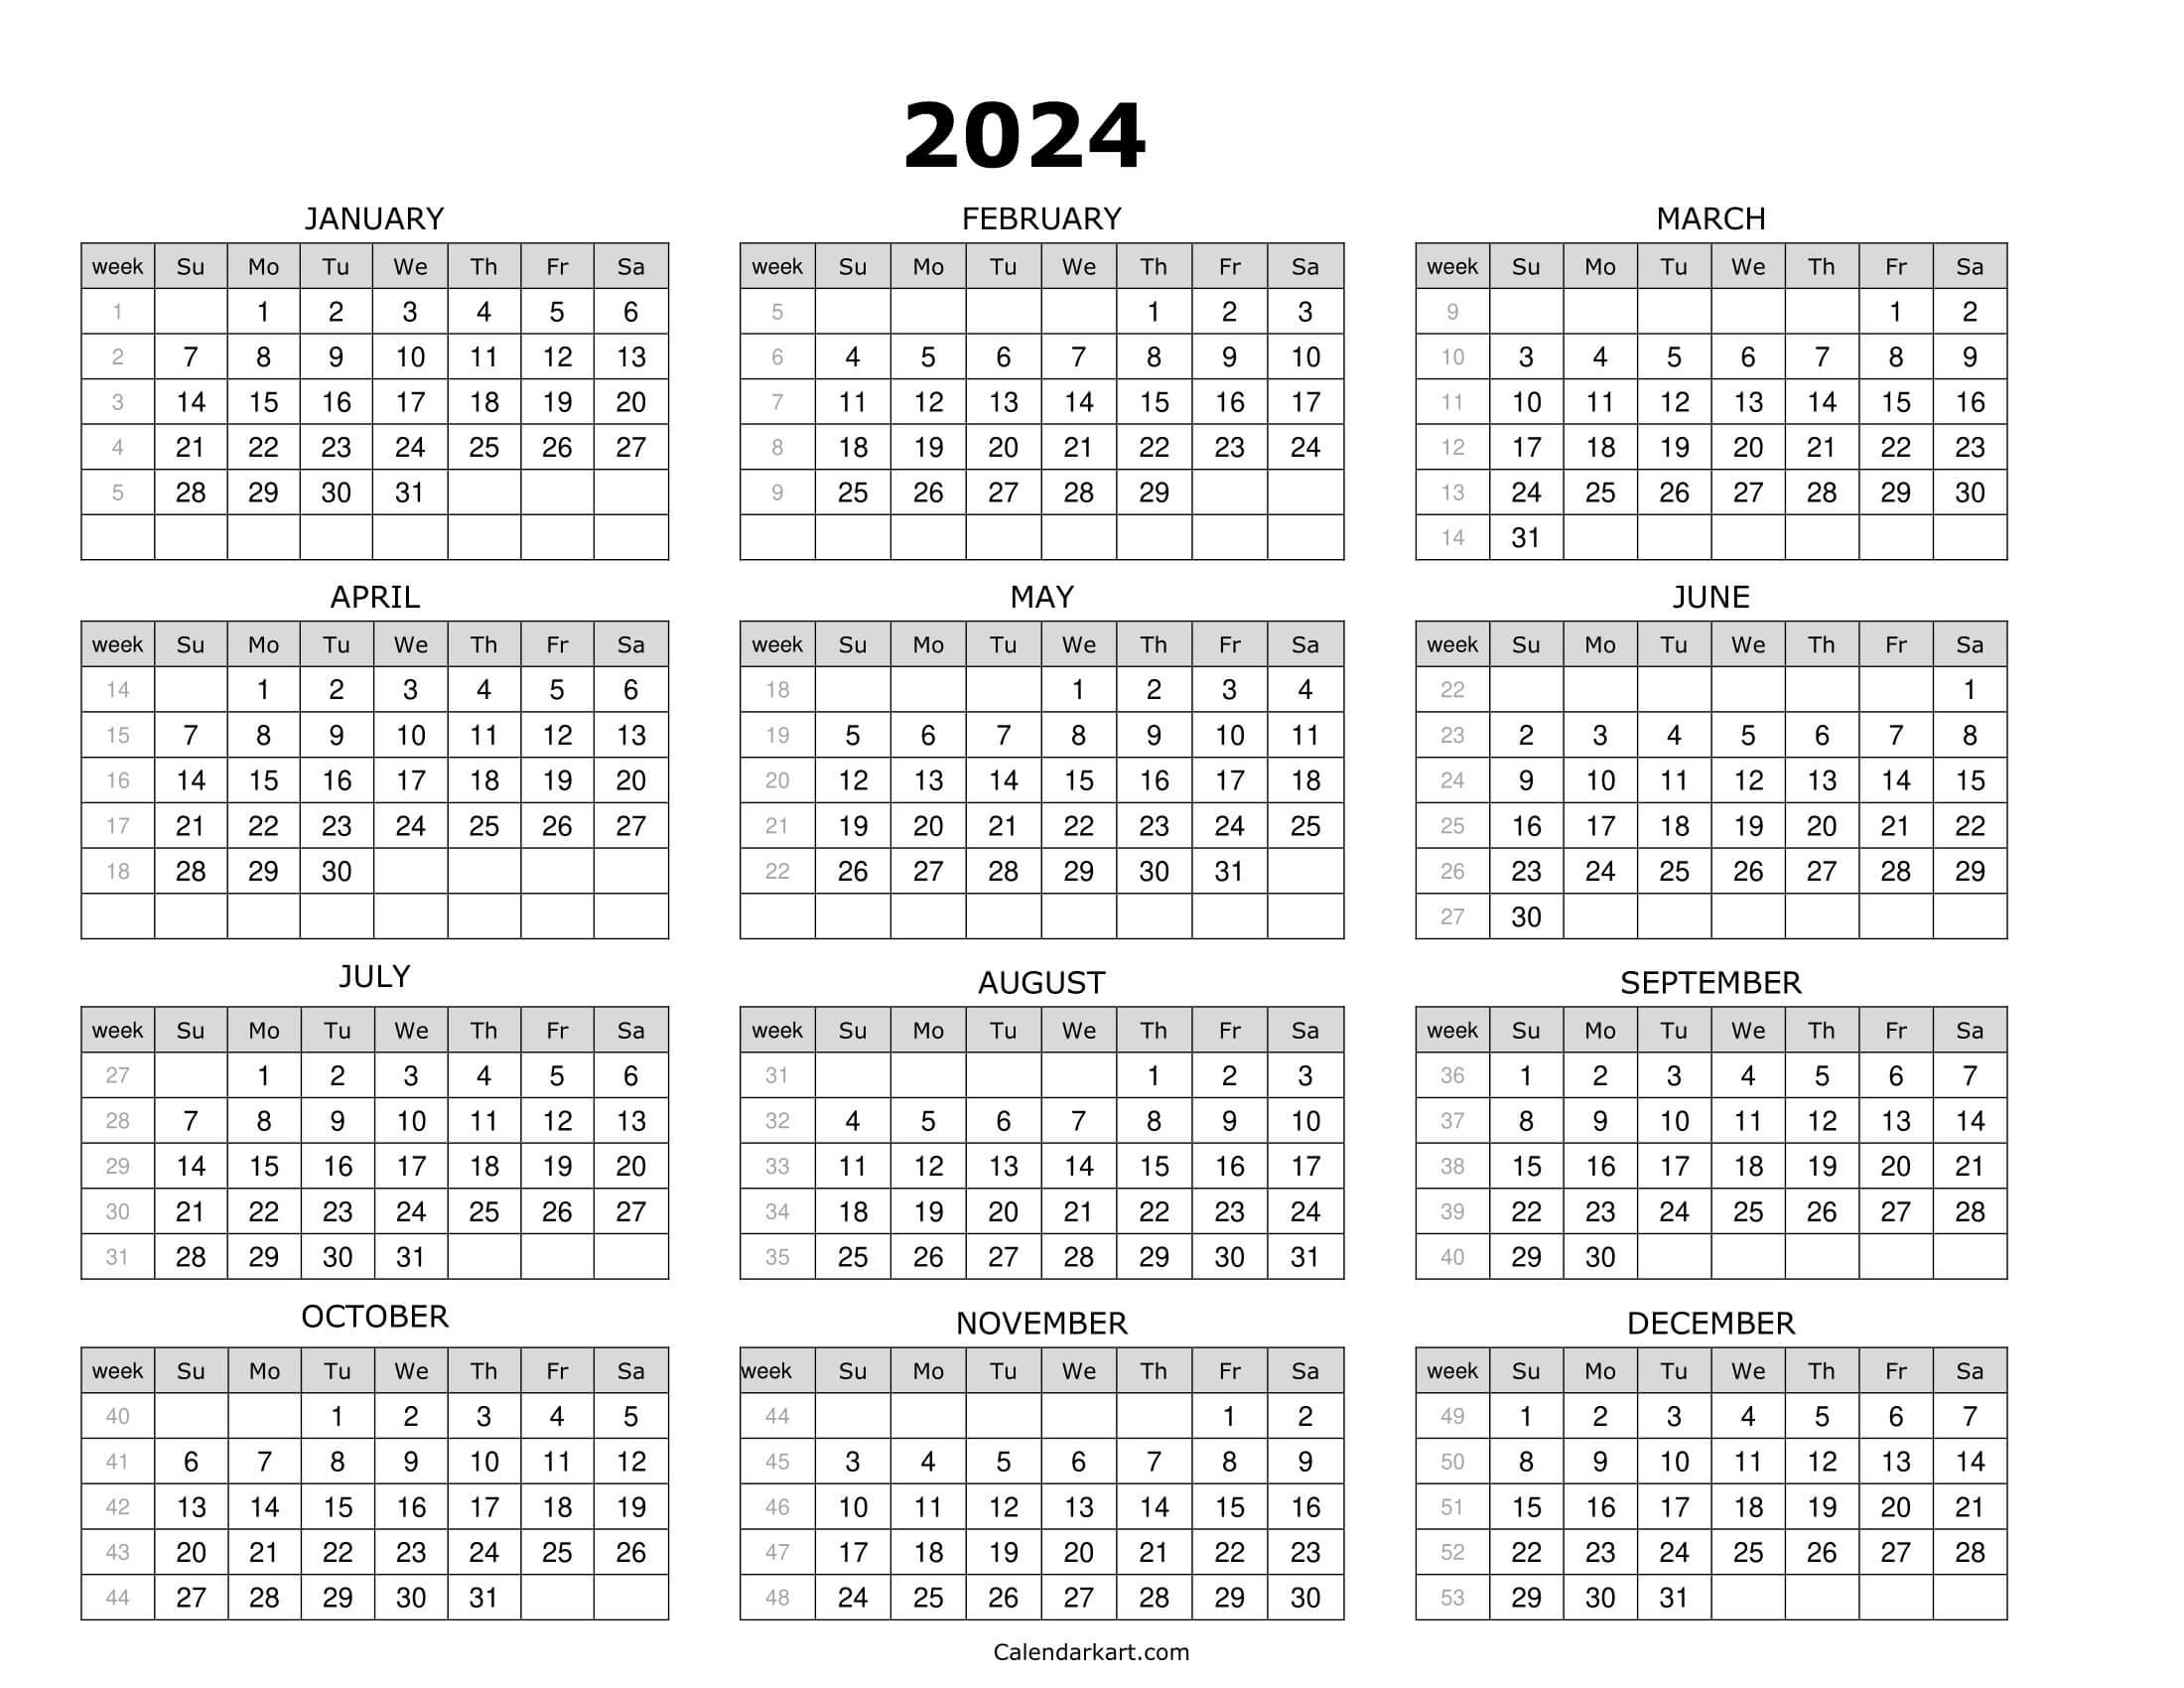 Download Printable Year At Glance Calendar 2024 | Calendarkart with regard to Free Printable Calendar 2024 Year At A Glance